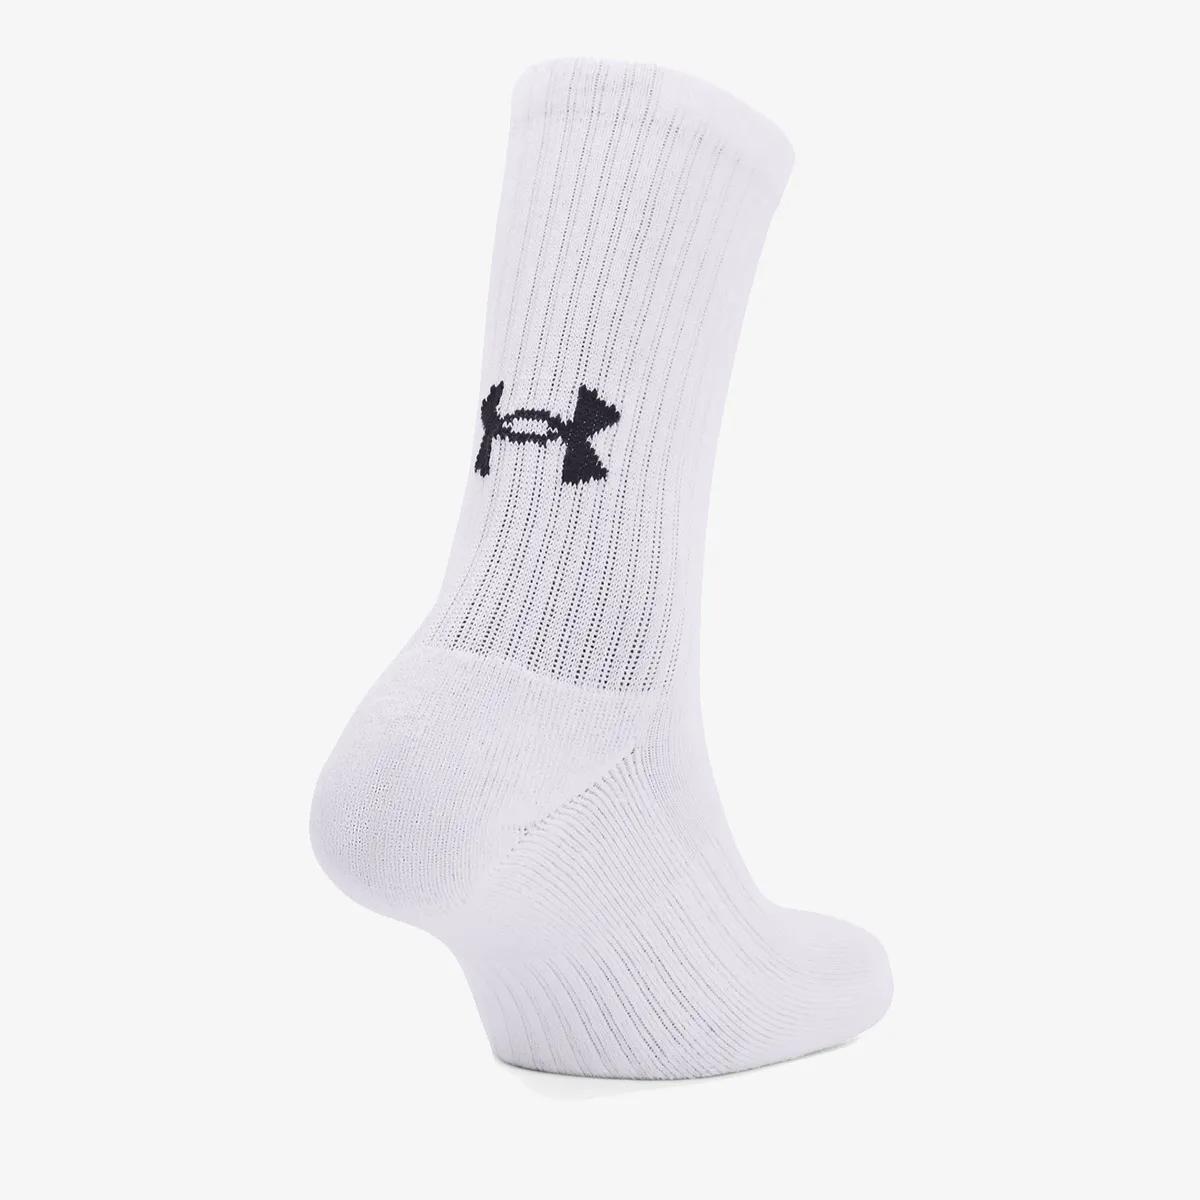 Under Armour Adult Core Crew Socks 3-Pack 